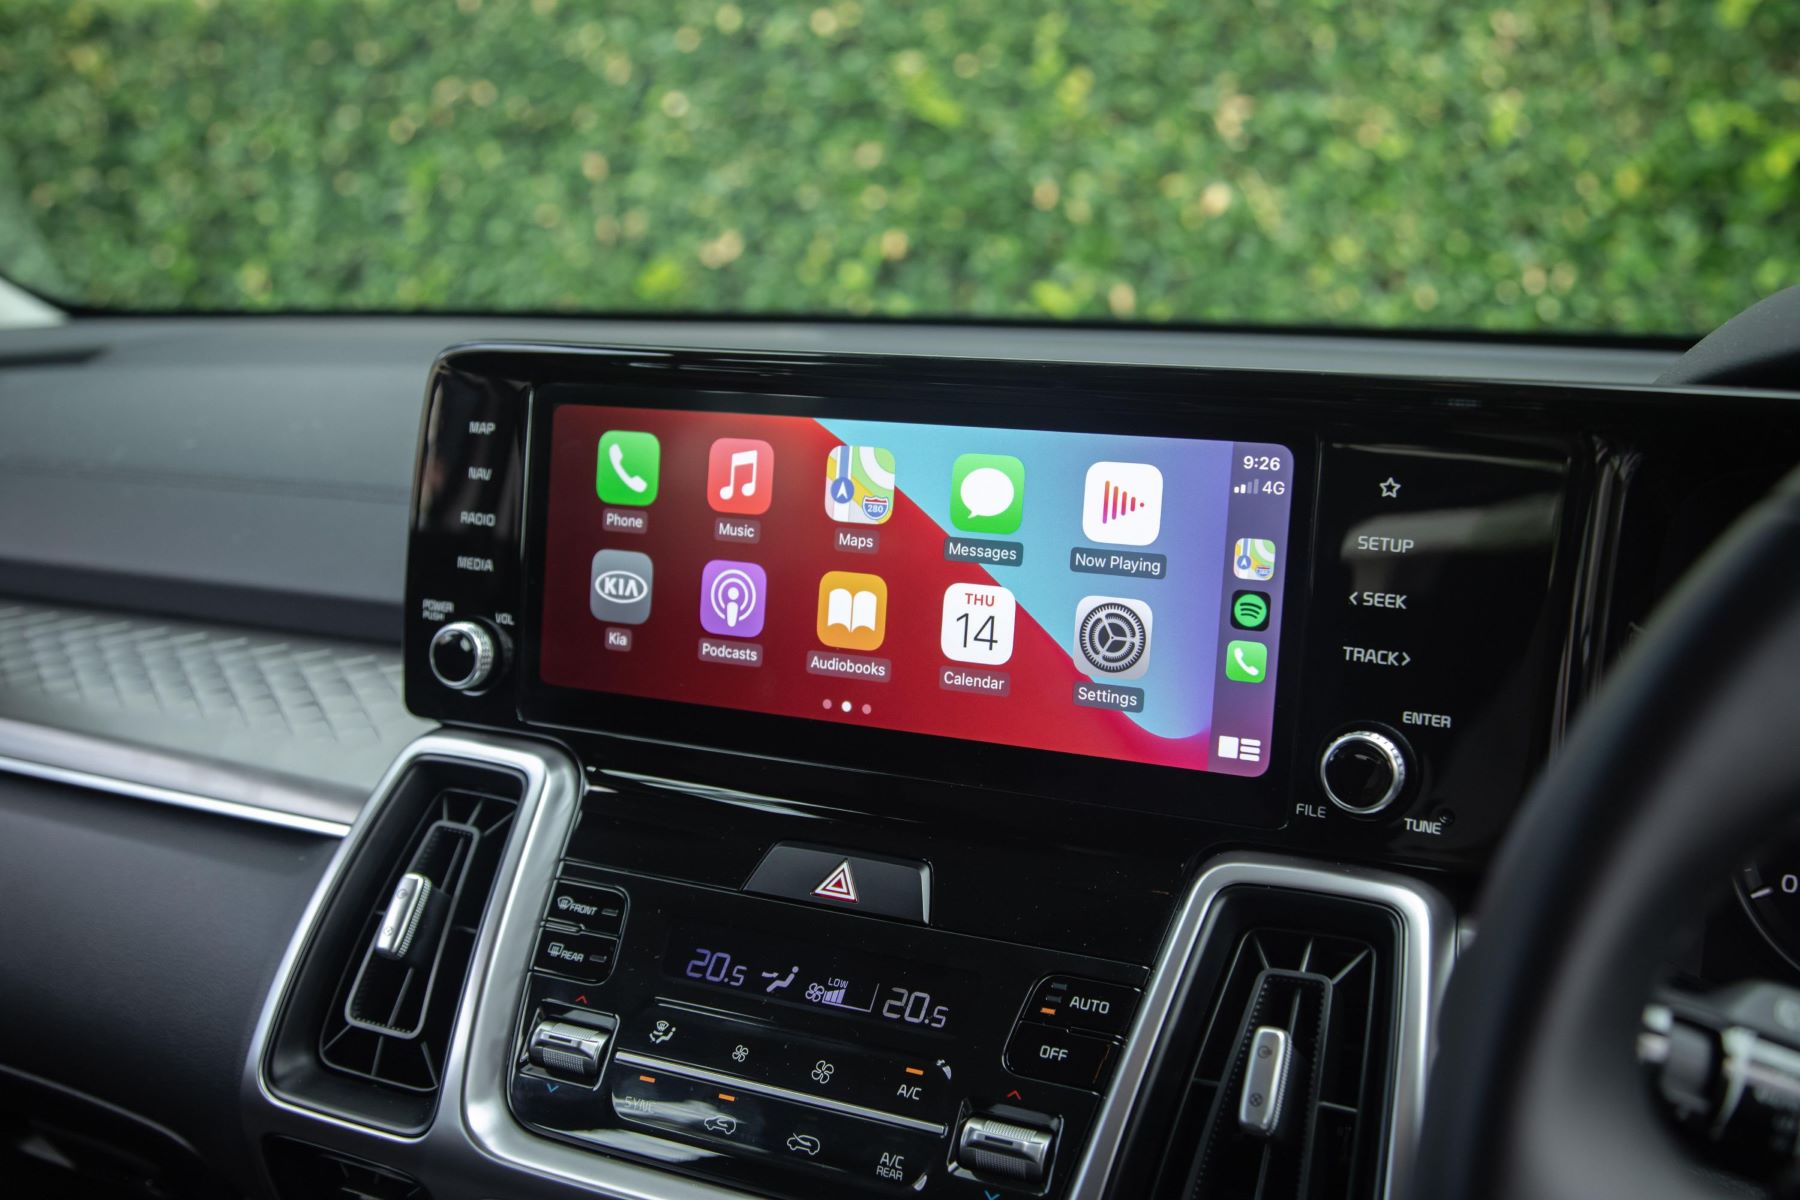 Upgrade Your Ride With This Amazing Wireless Infotainment System